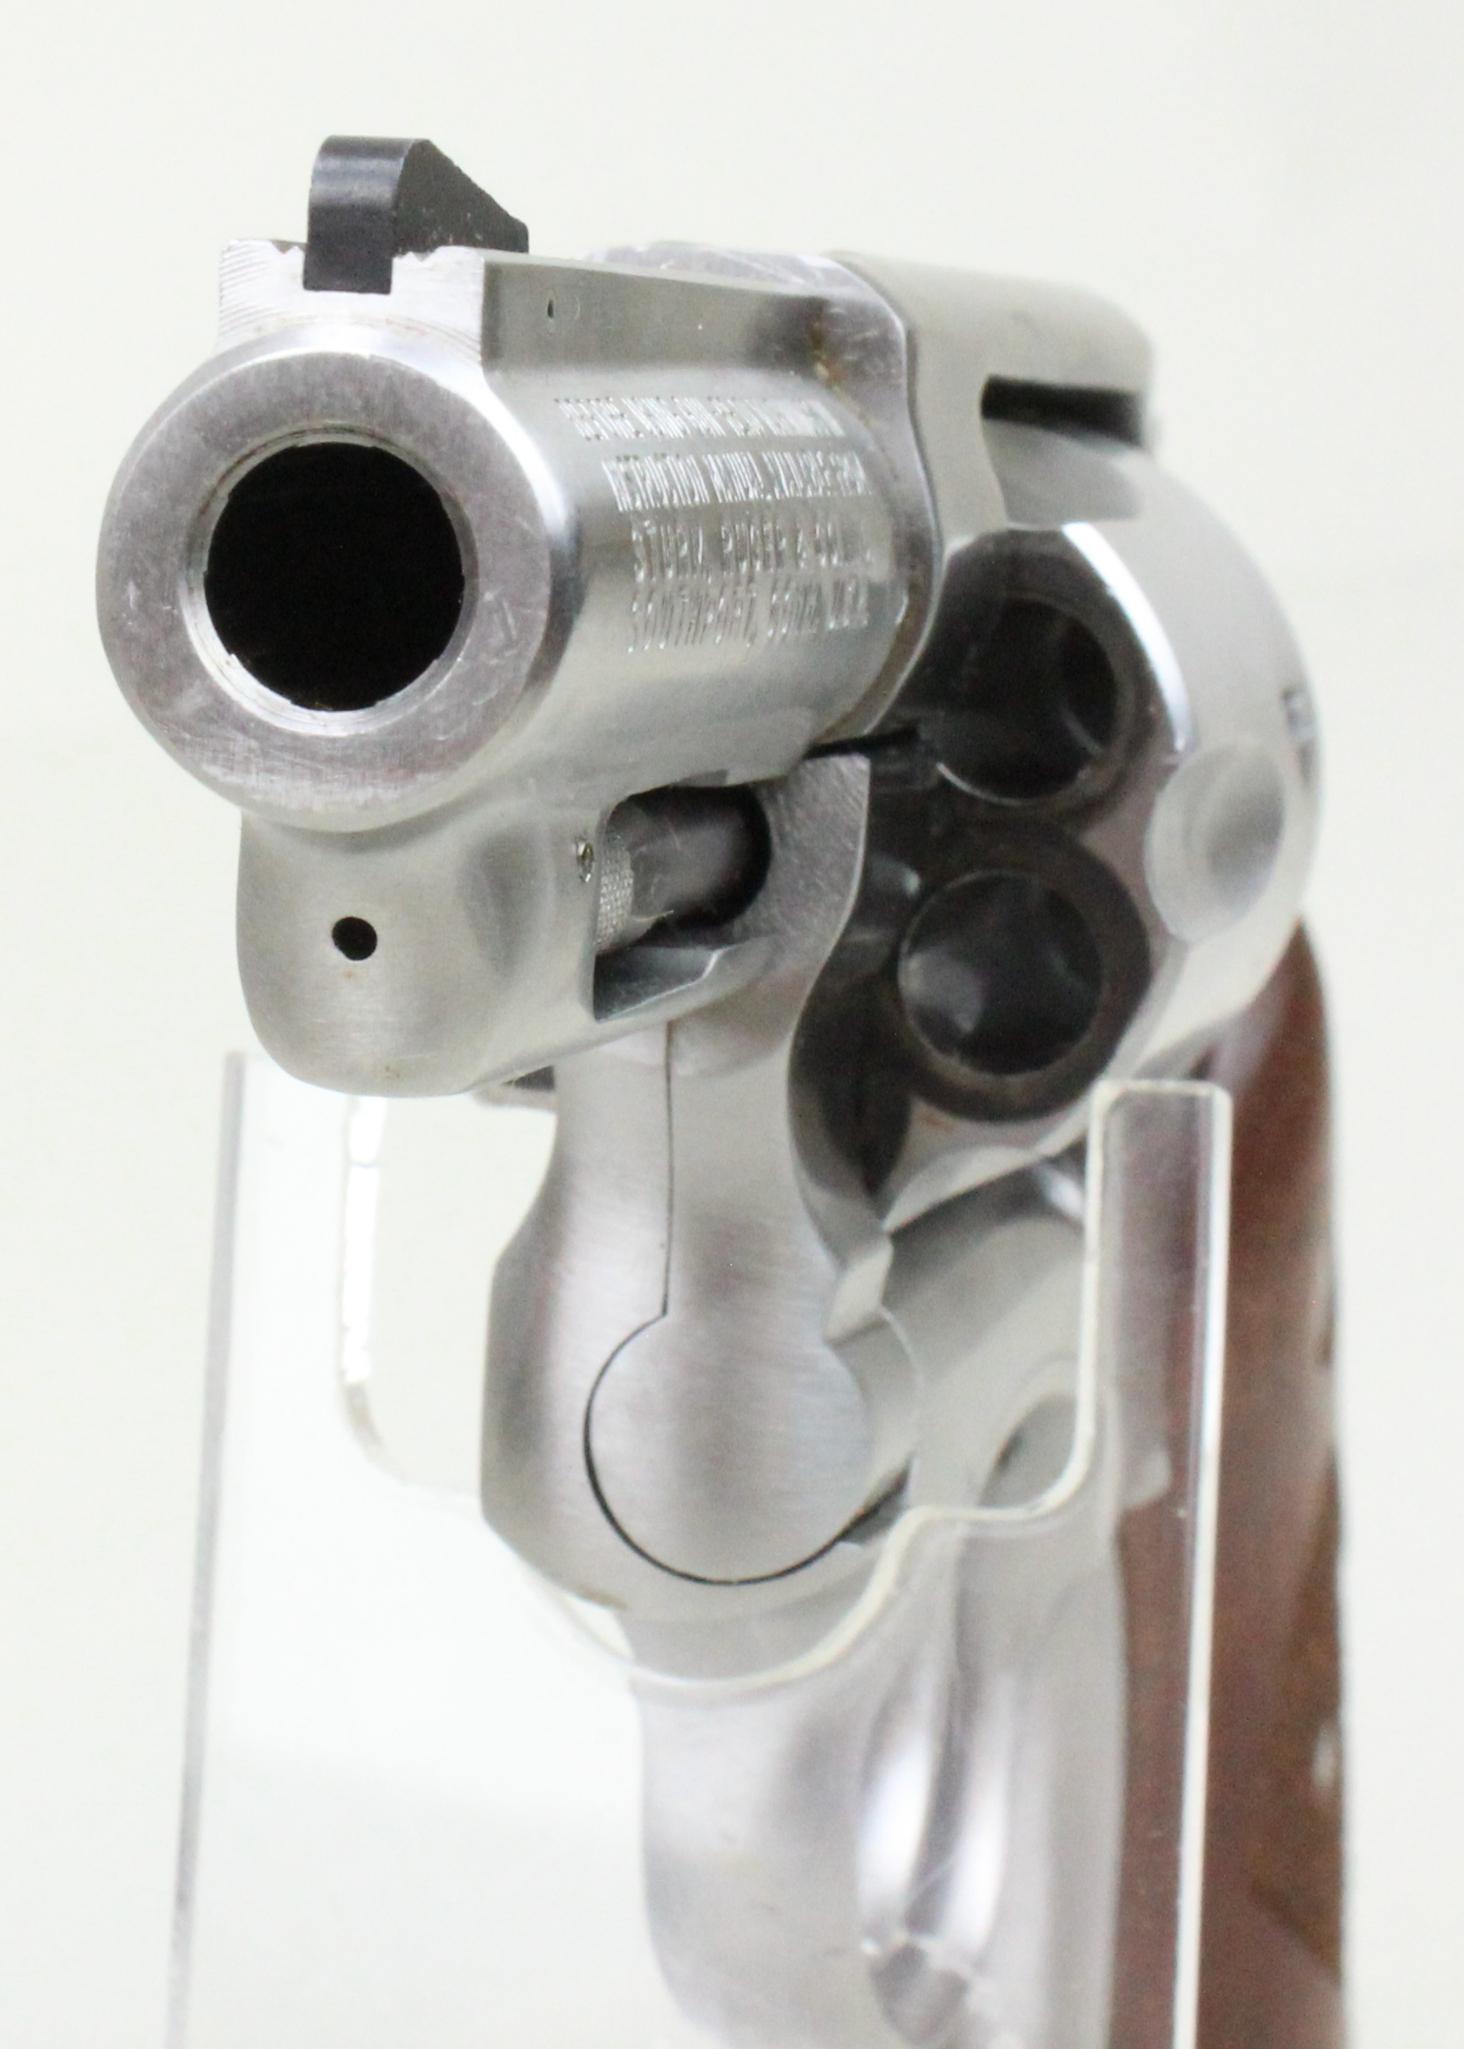 Ruger Speed-Six double action revolver.